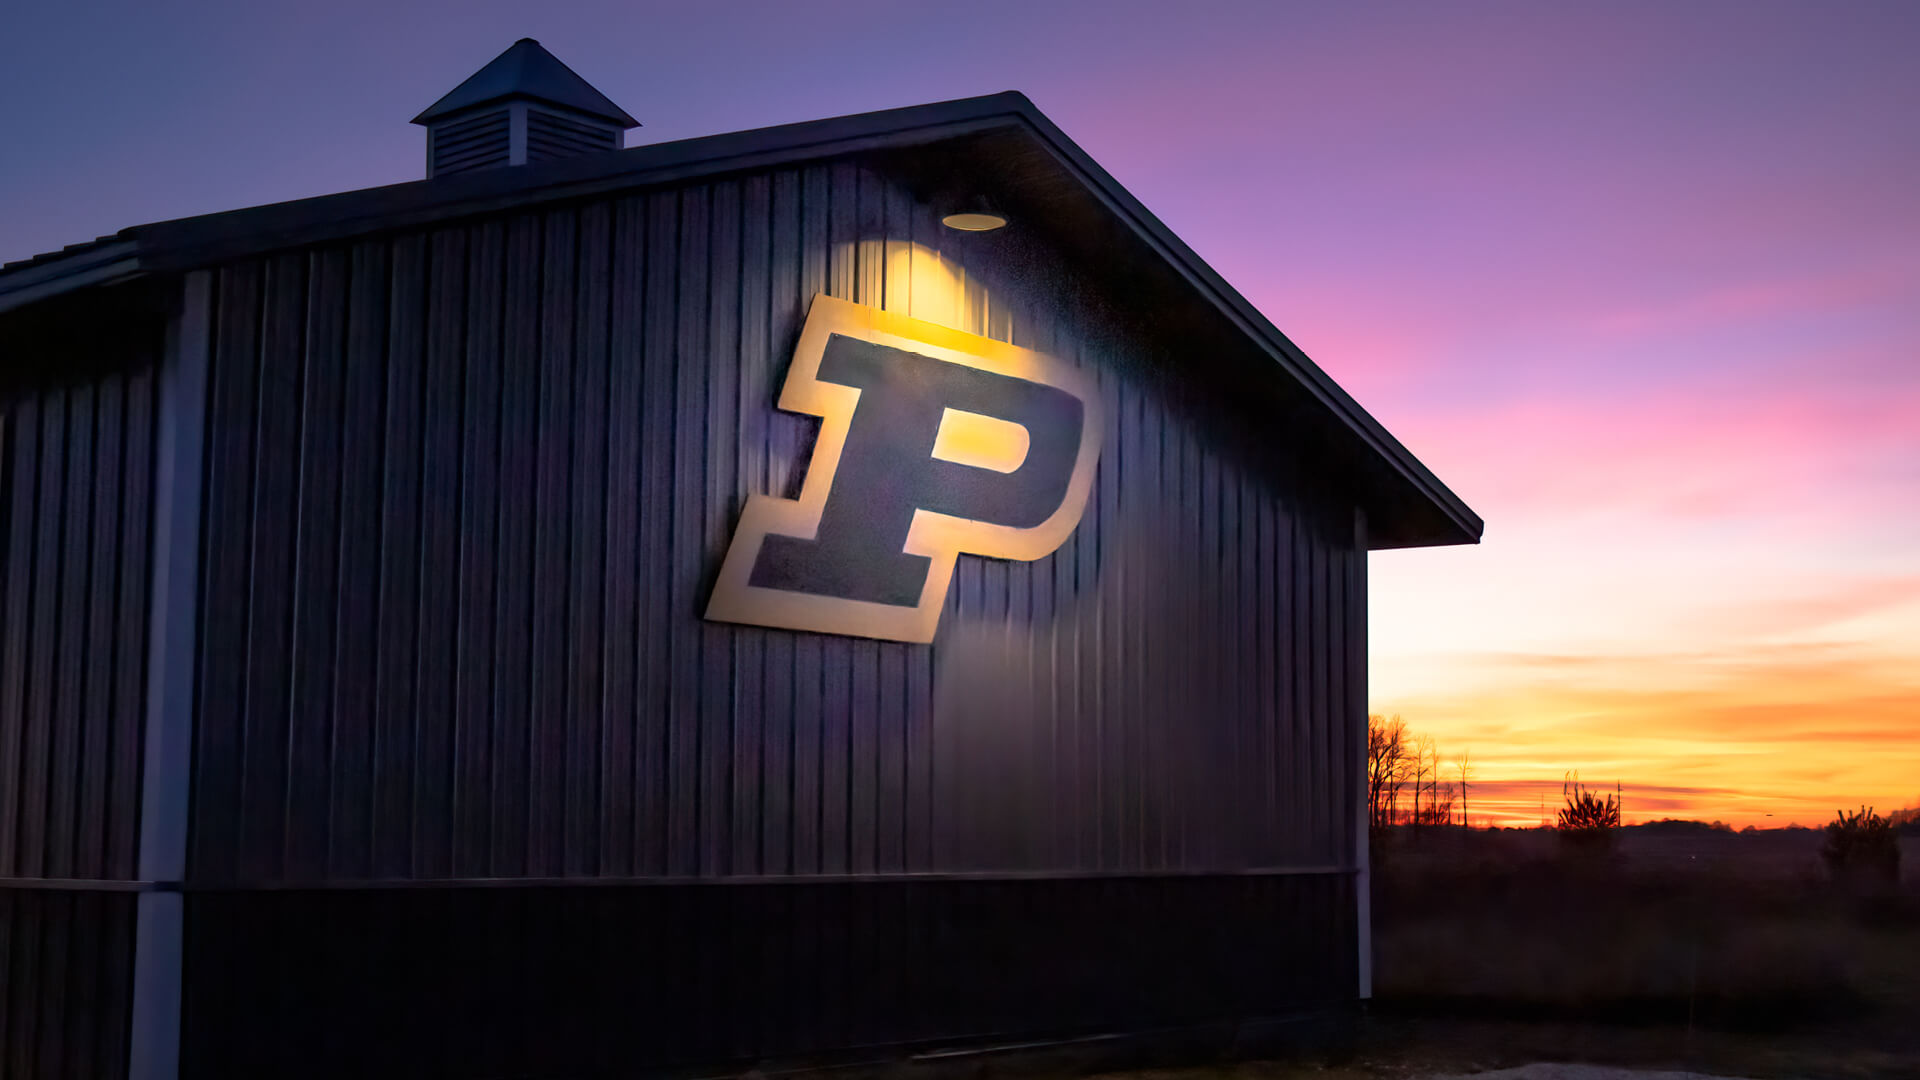 The Purdue-inspired Motion P barn